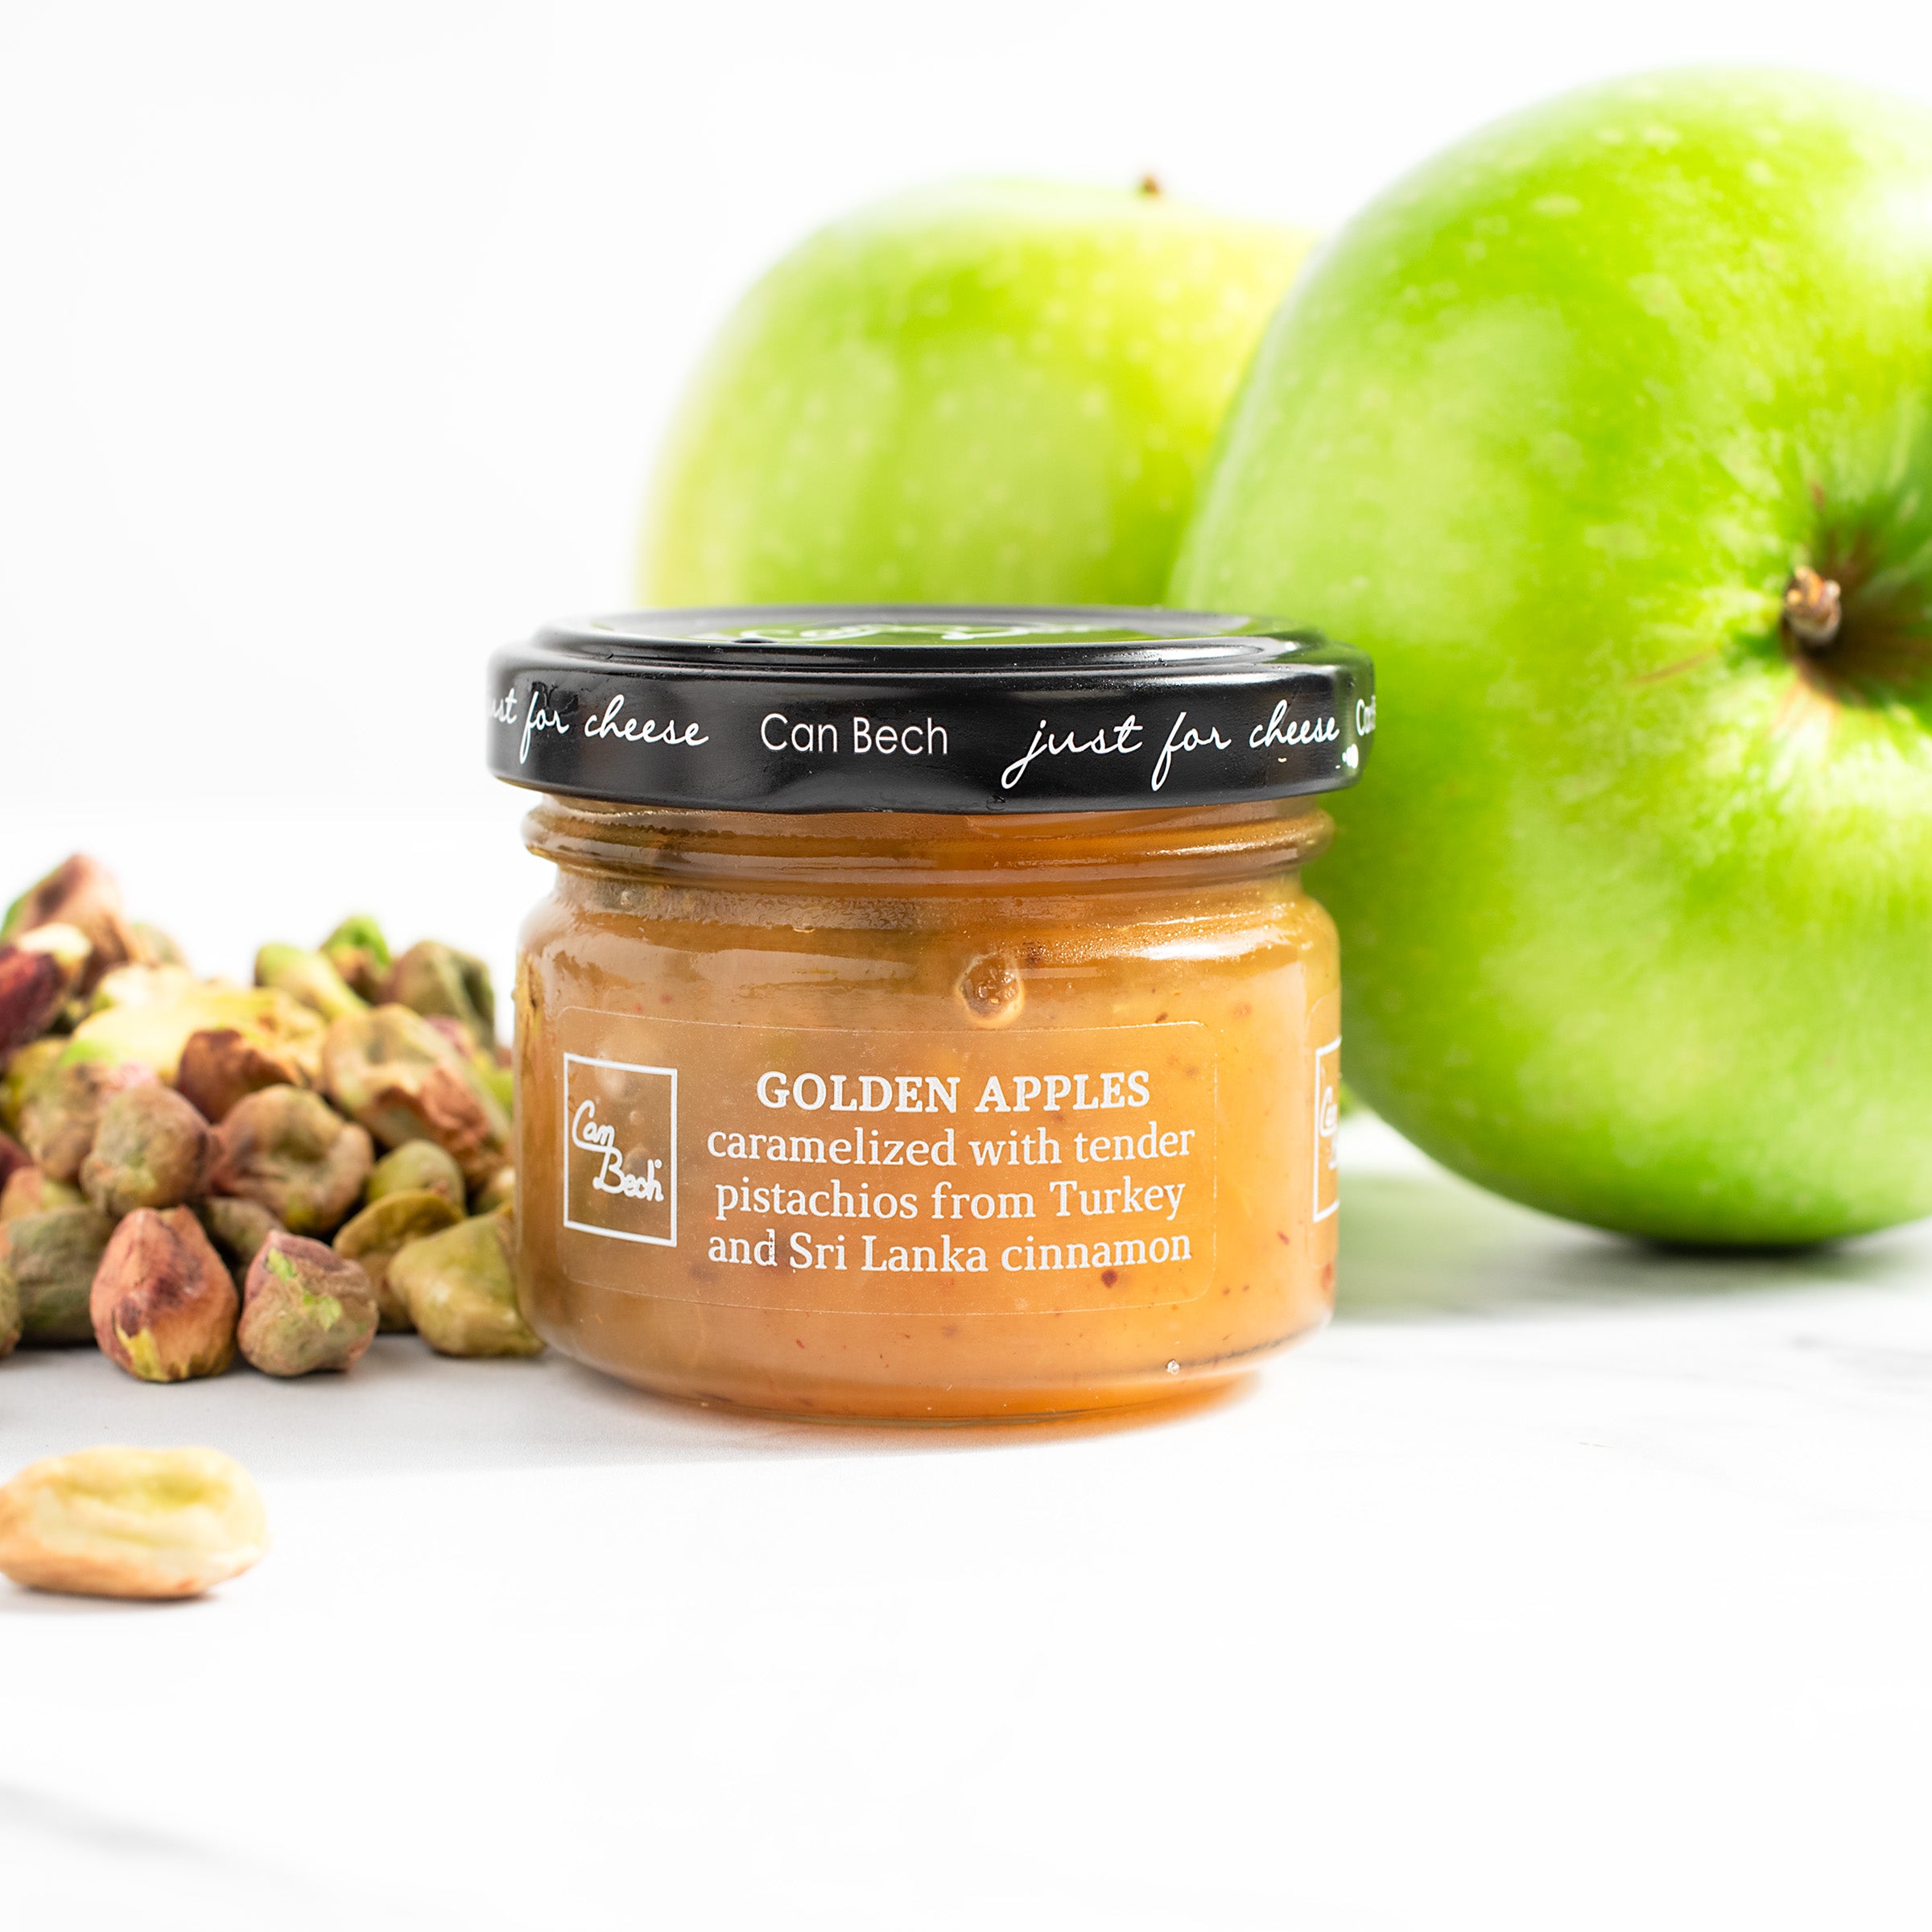 Golden Apple Spread with Pistachios and Cinnamon